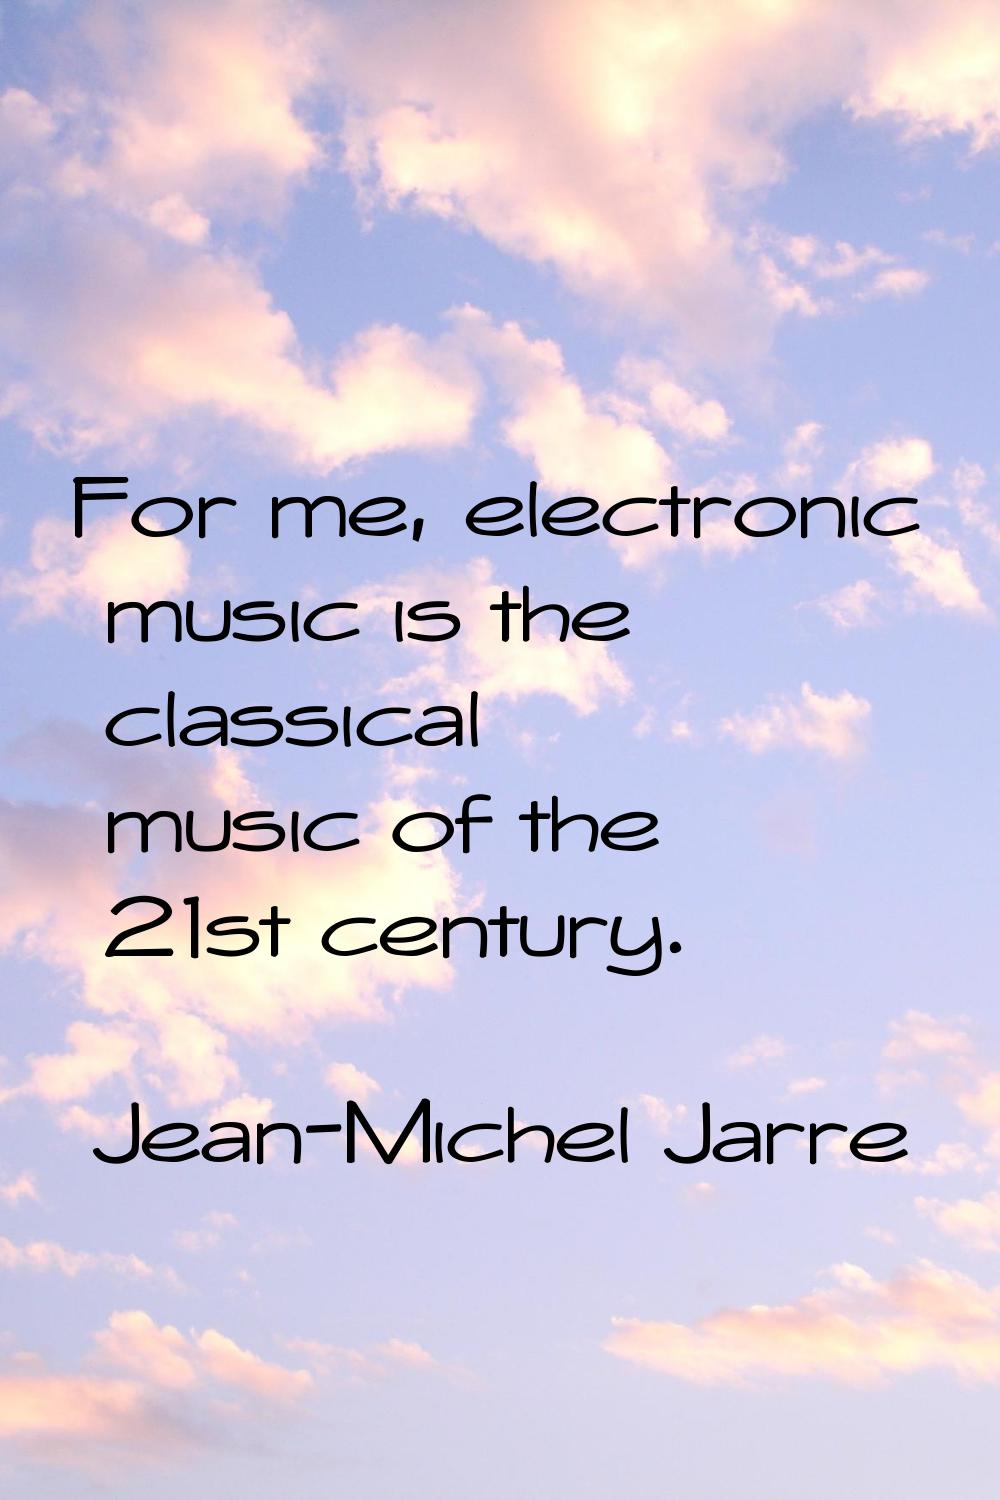 For me, electronic music is the classical music of the 21st century.